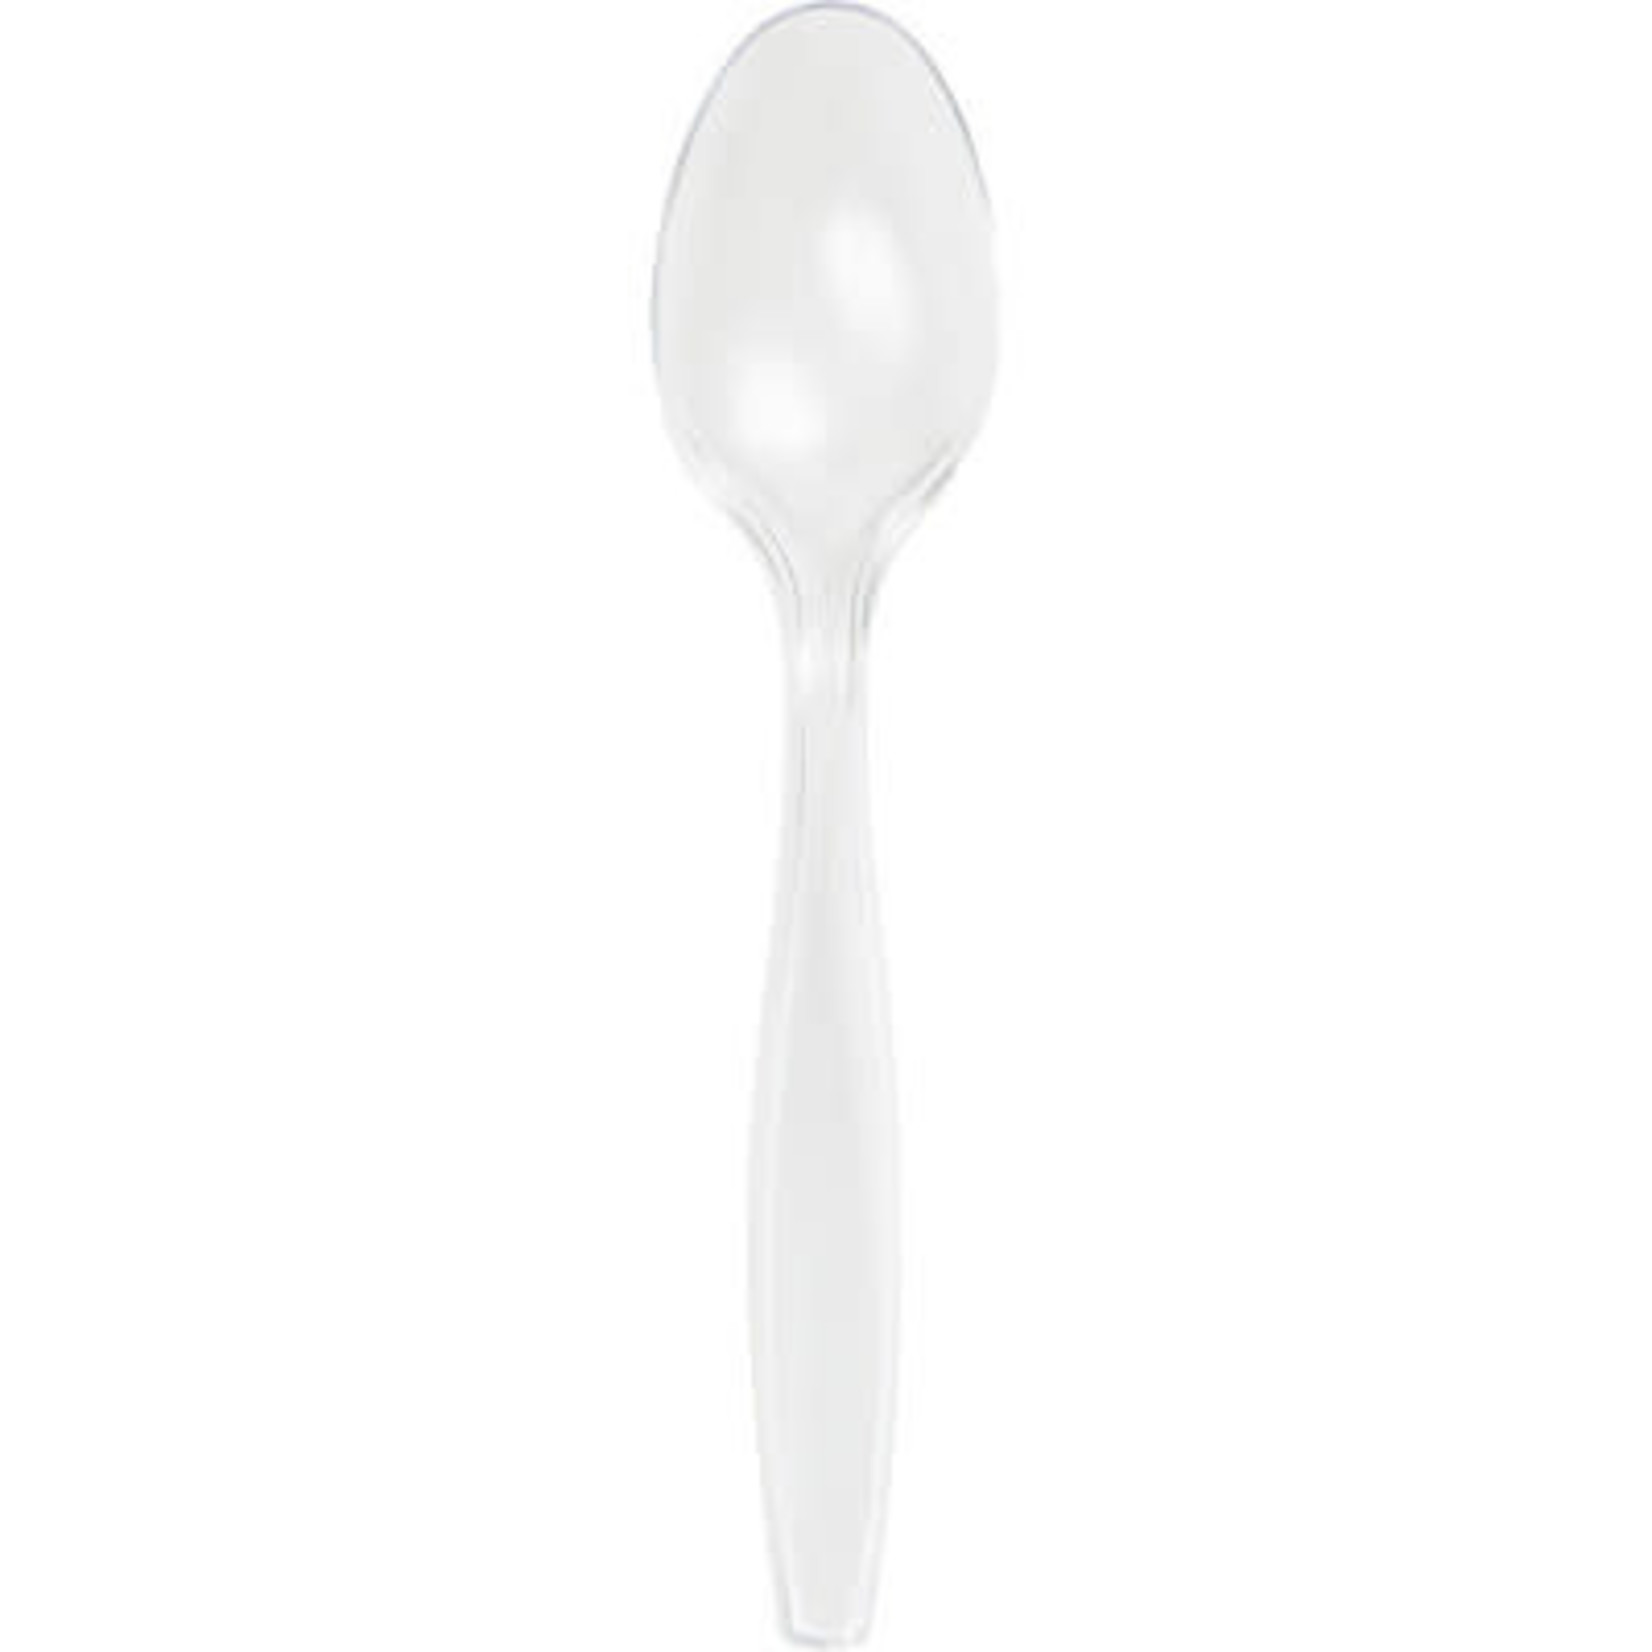 Touch of Color Clear Premium Plastic Spoons - 24ct.